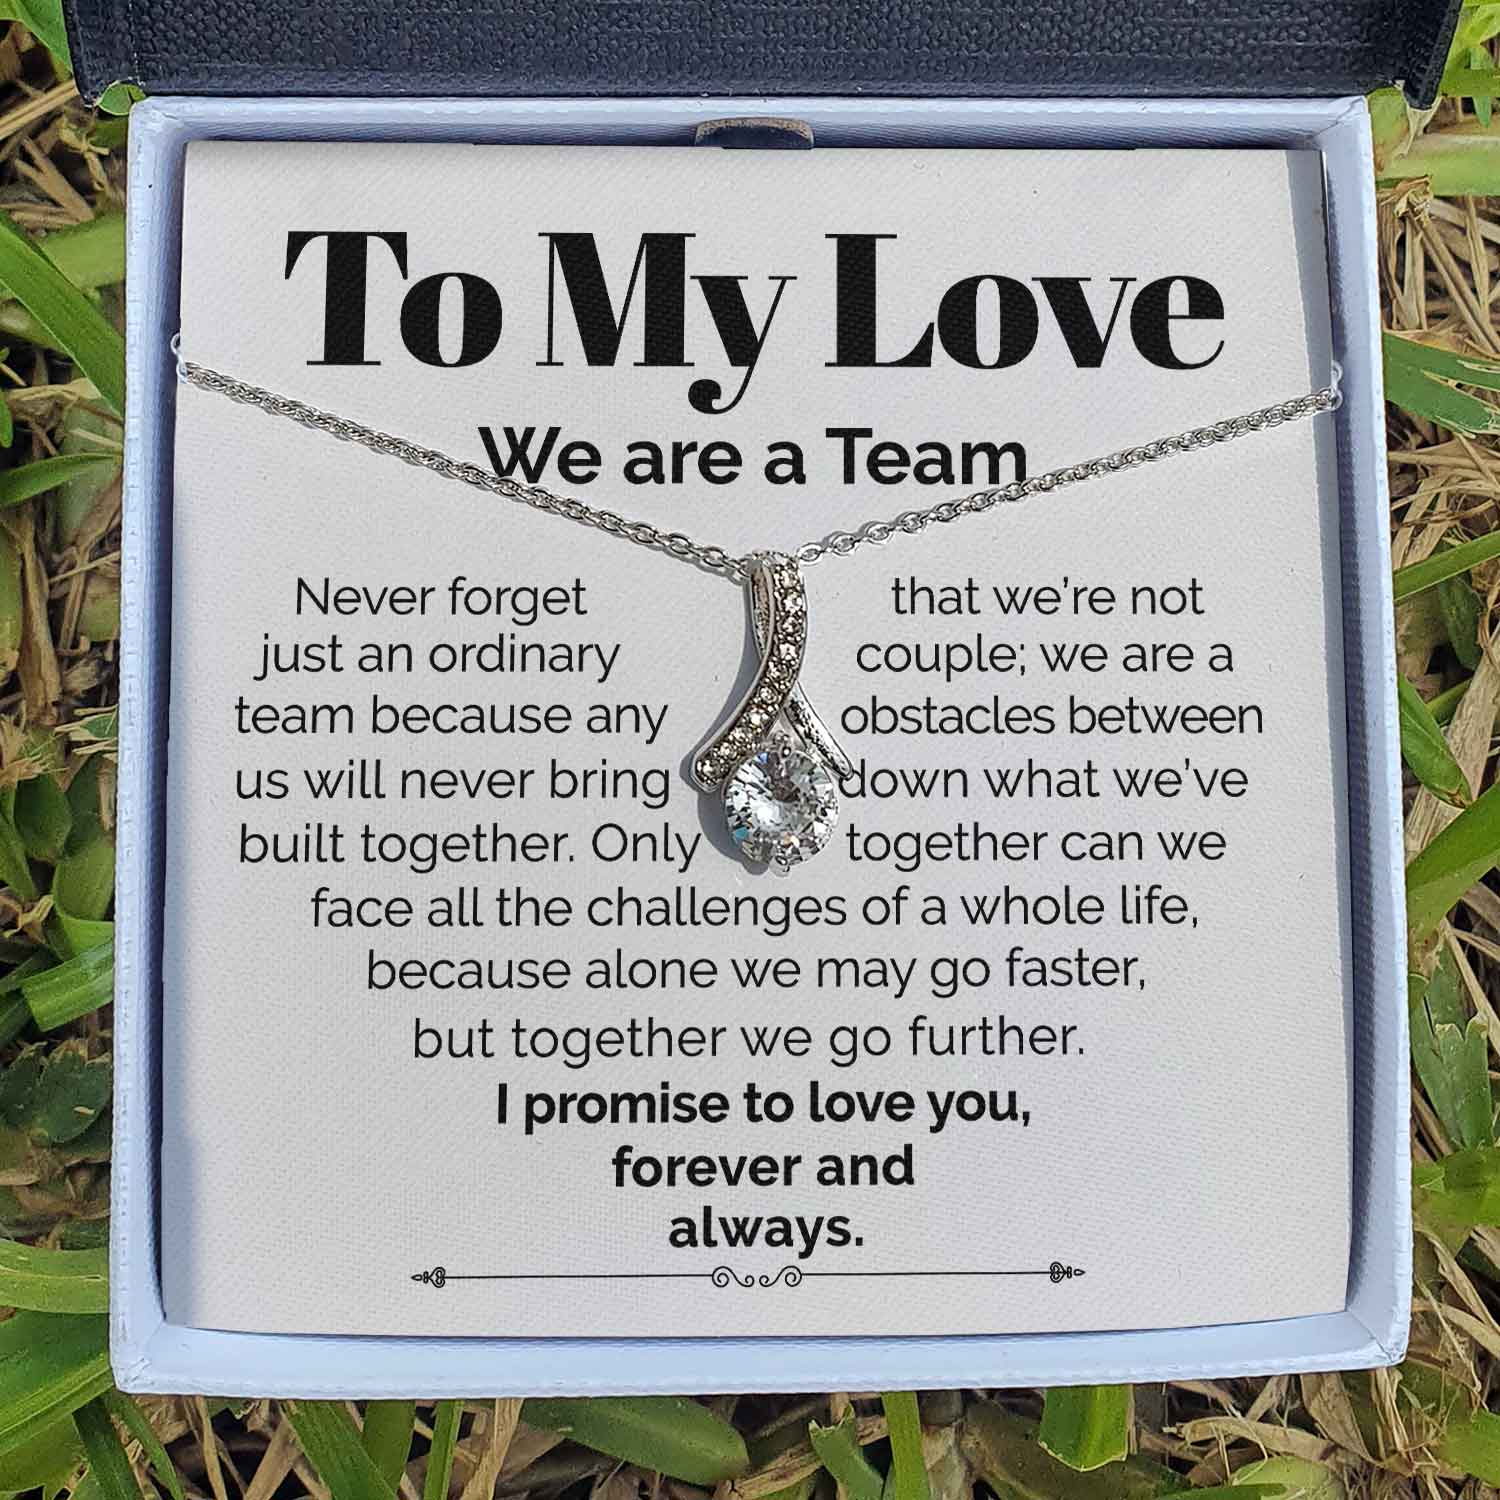 ShineOn Fulfillment Jewelry Standard Box To My Love - We Are A Team - Ribbon Necklace